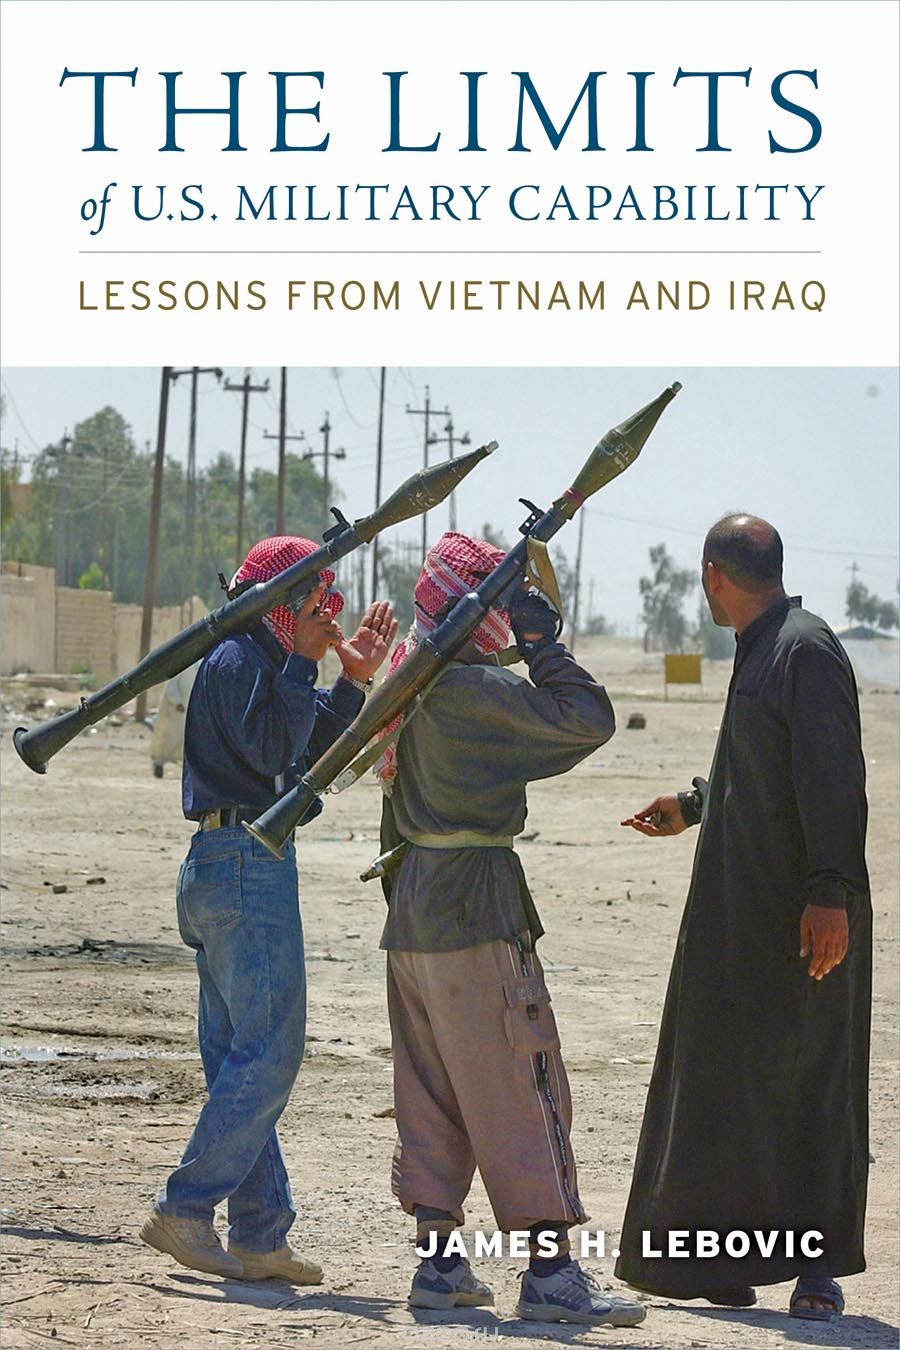 The Limits of U.S. Military Capability – Lessons from Vietnam and Iraq